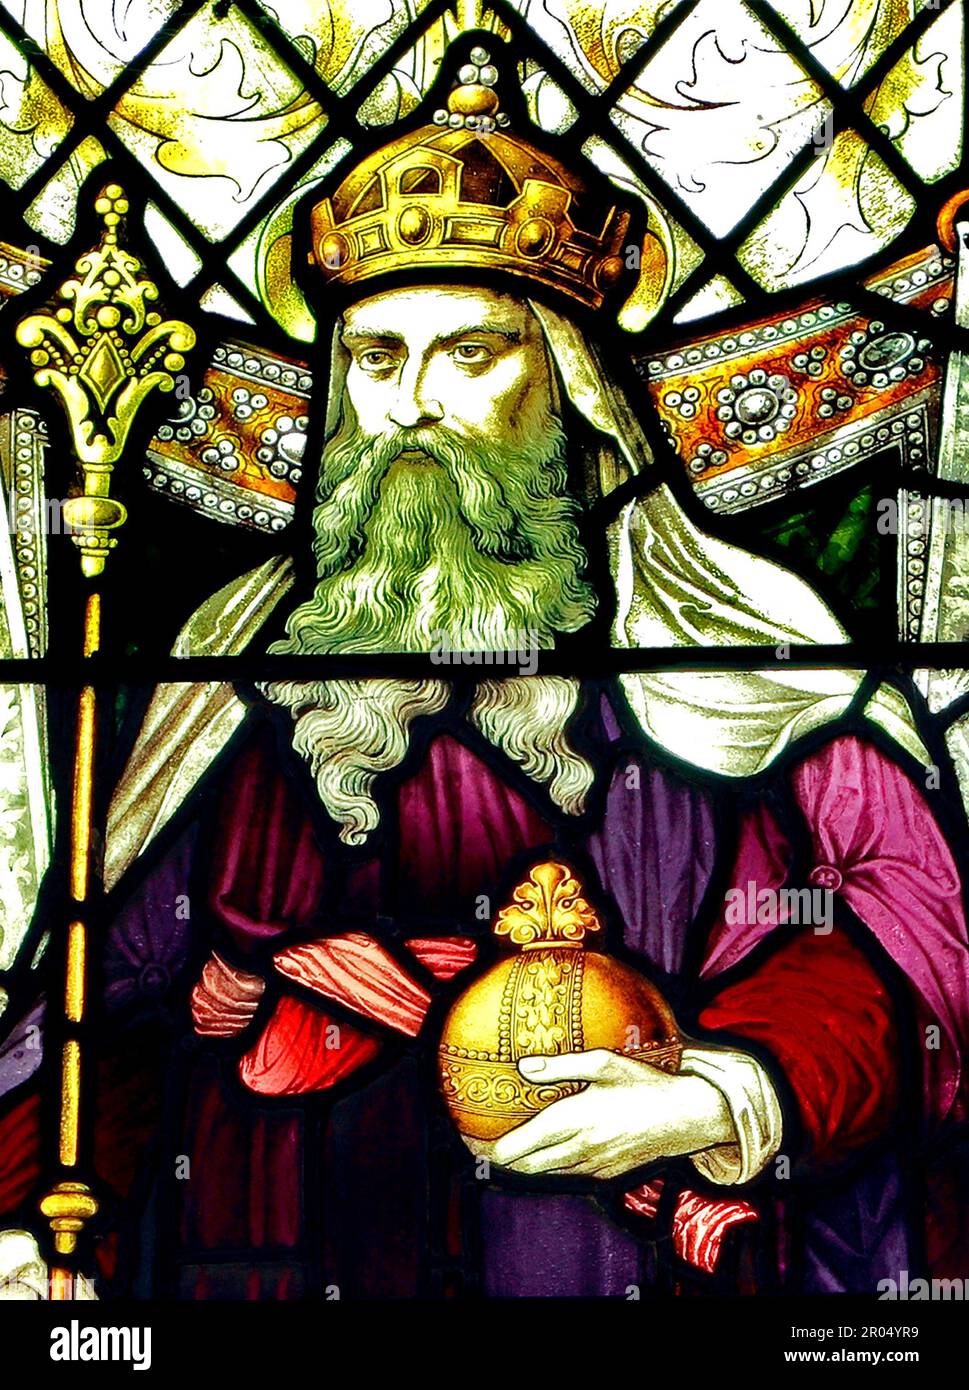 Hiram, Phoenician  King of Tyre, Old Hunstanton,late 19th century stained glass window, Norfolk, England UK, Bible character Stock Photo